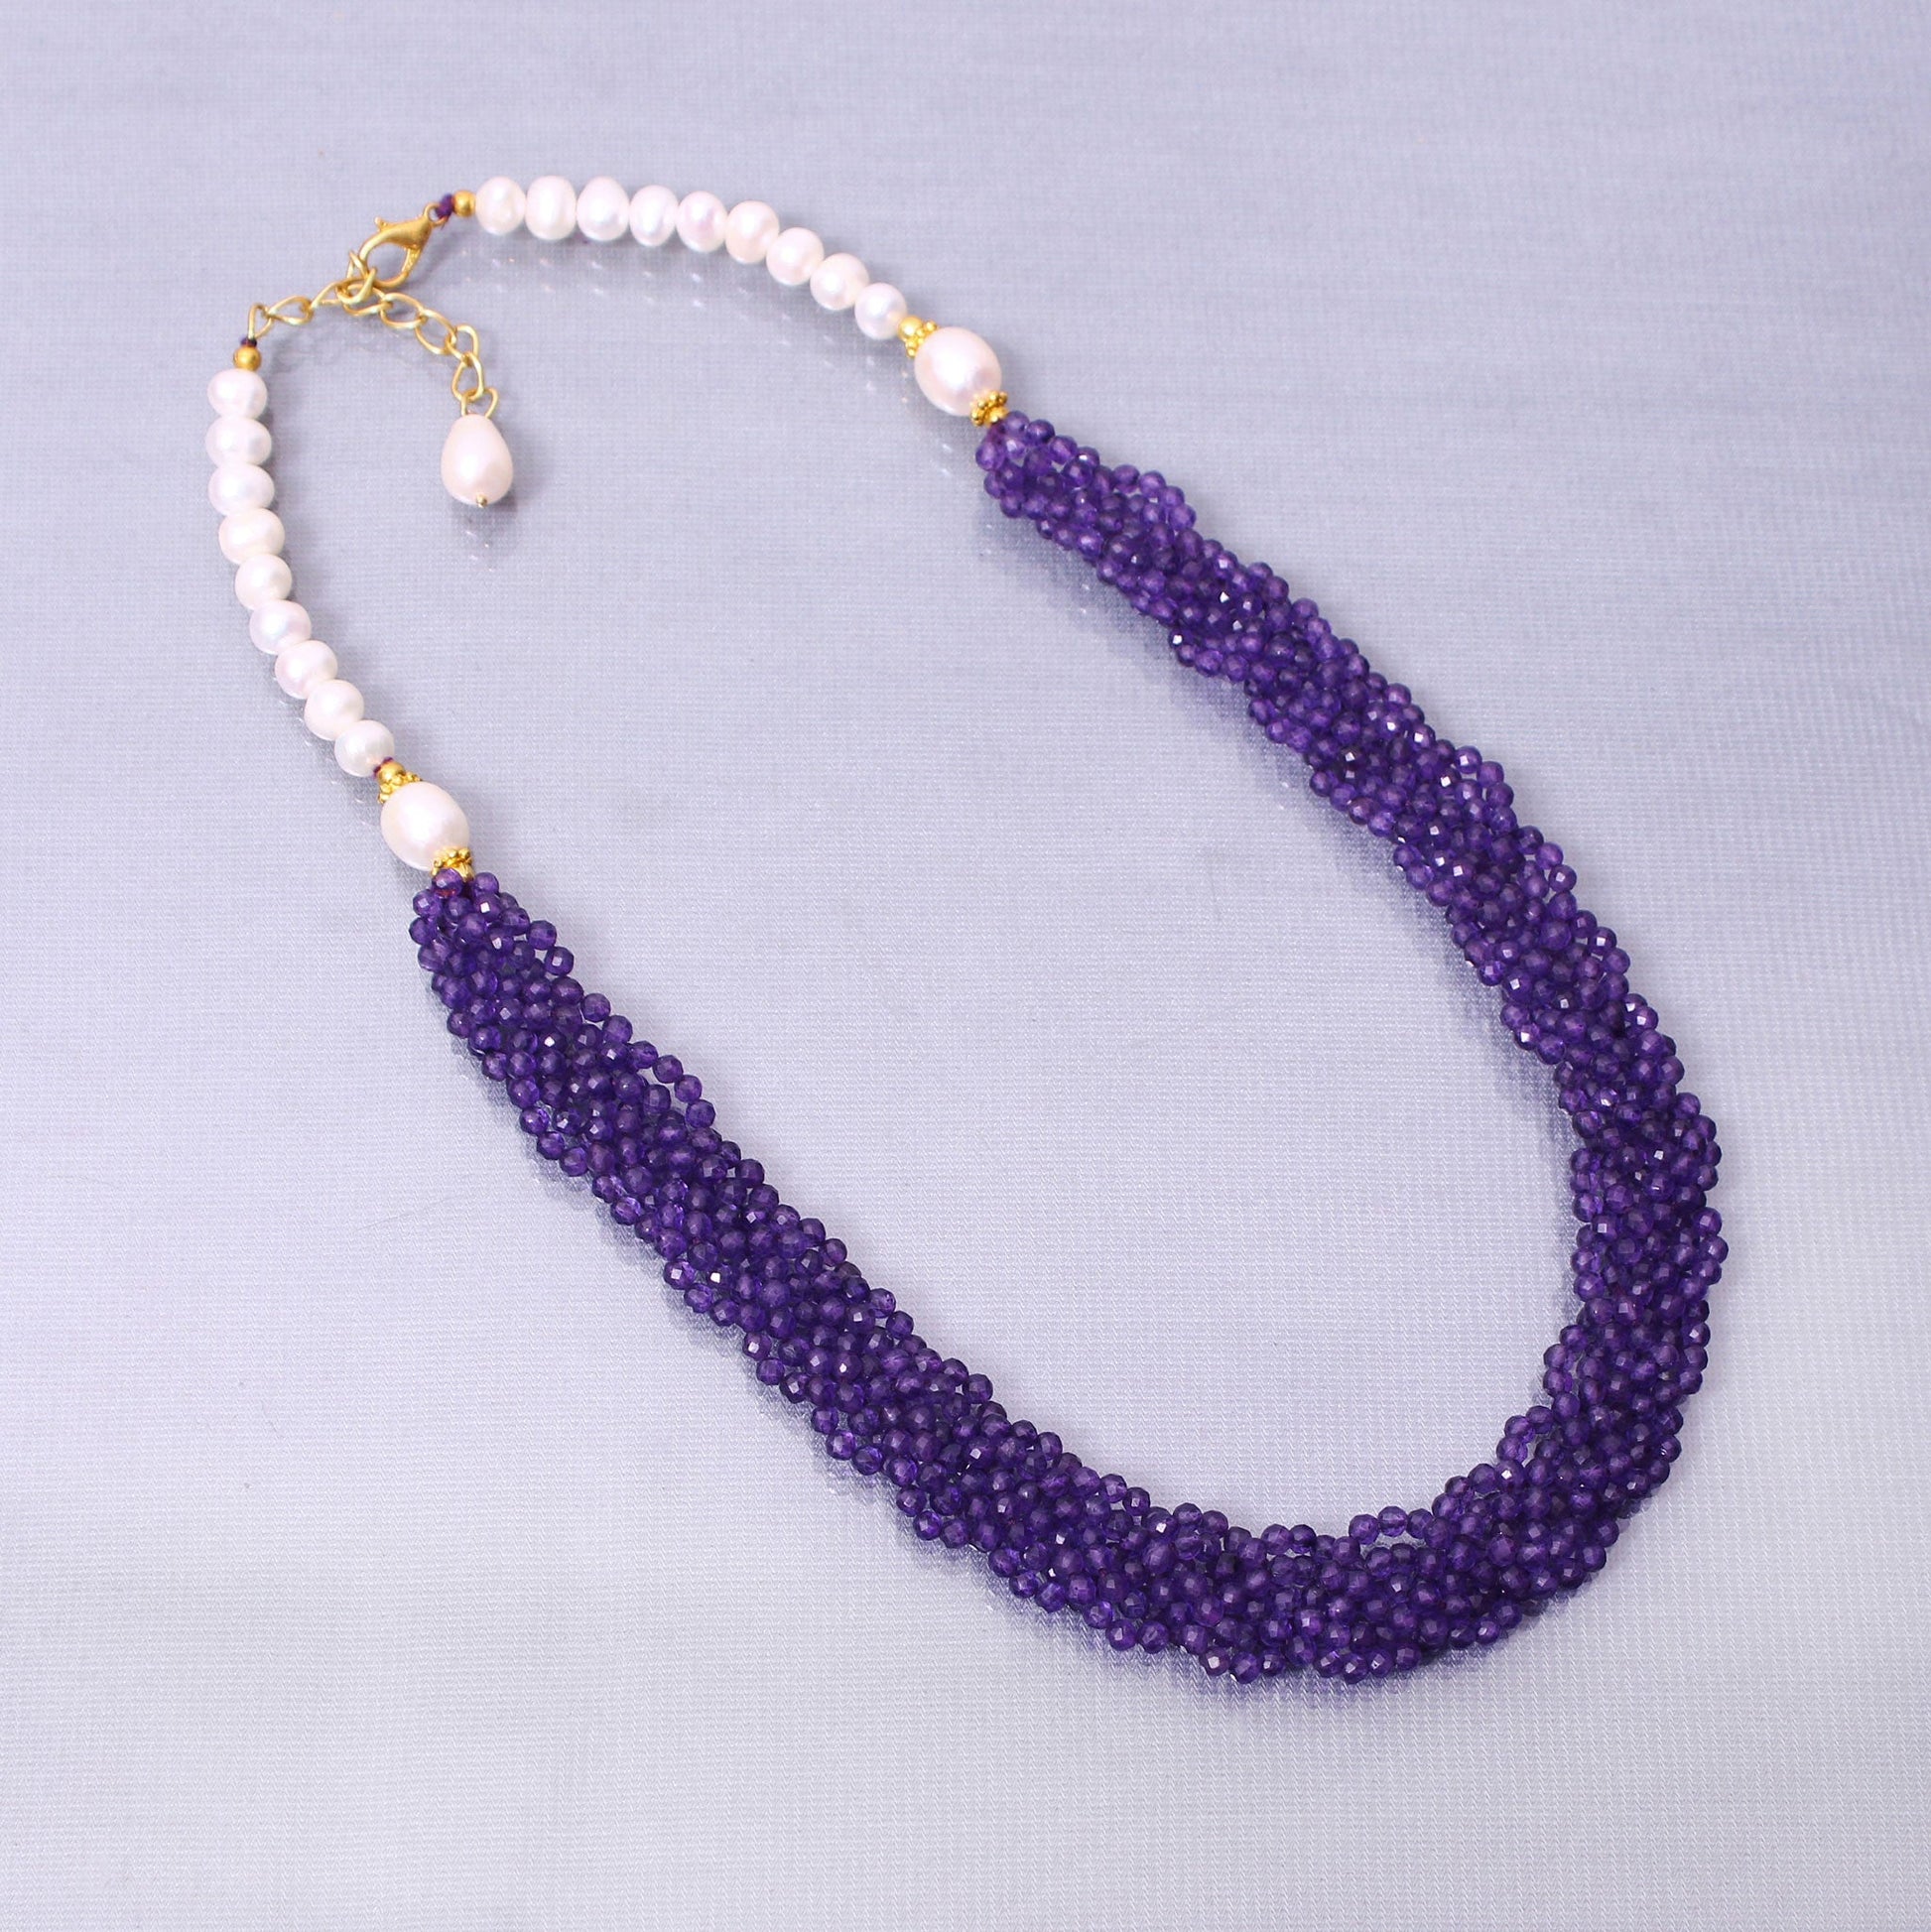 Luxurious Hand Woven Amethyst Pearl Necklace with Sterling Silver Gold Plated Chain GemsRush